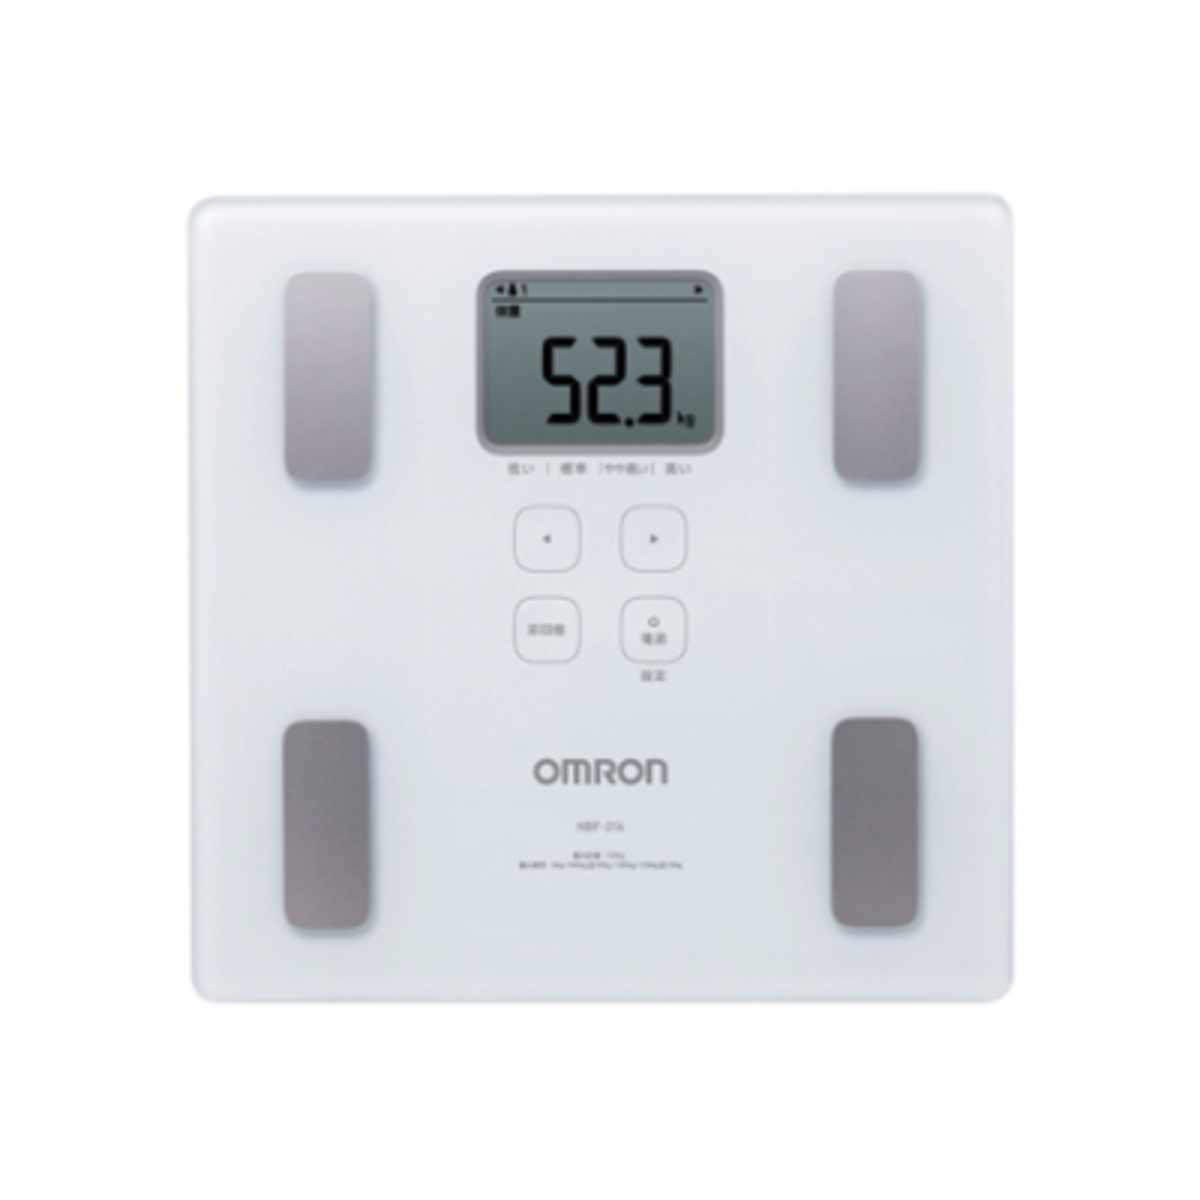 OMRON - HBF-214 Weight and Body Fat Measurer - White [Licensed in Hong Kong]